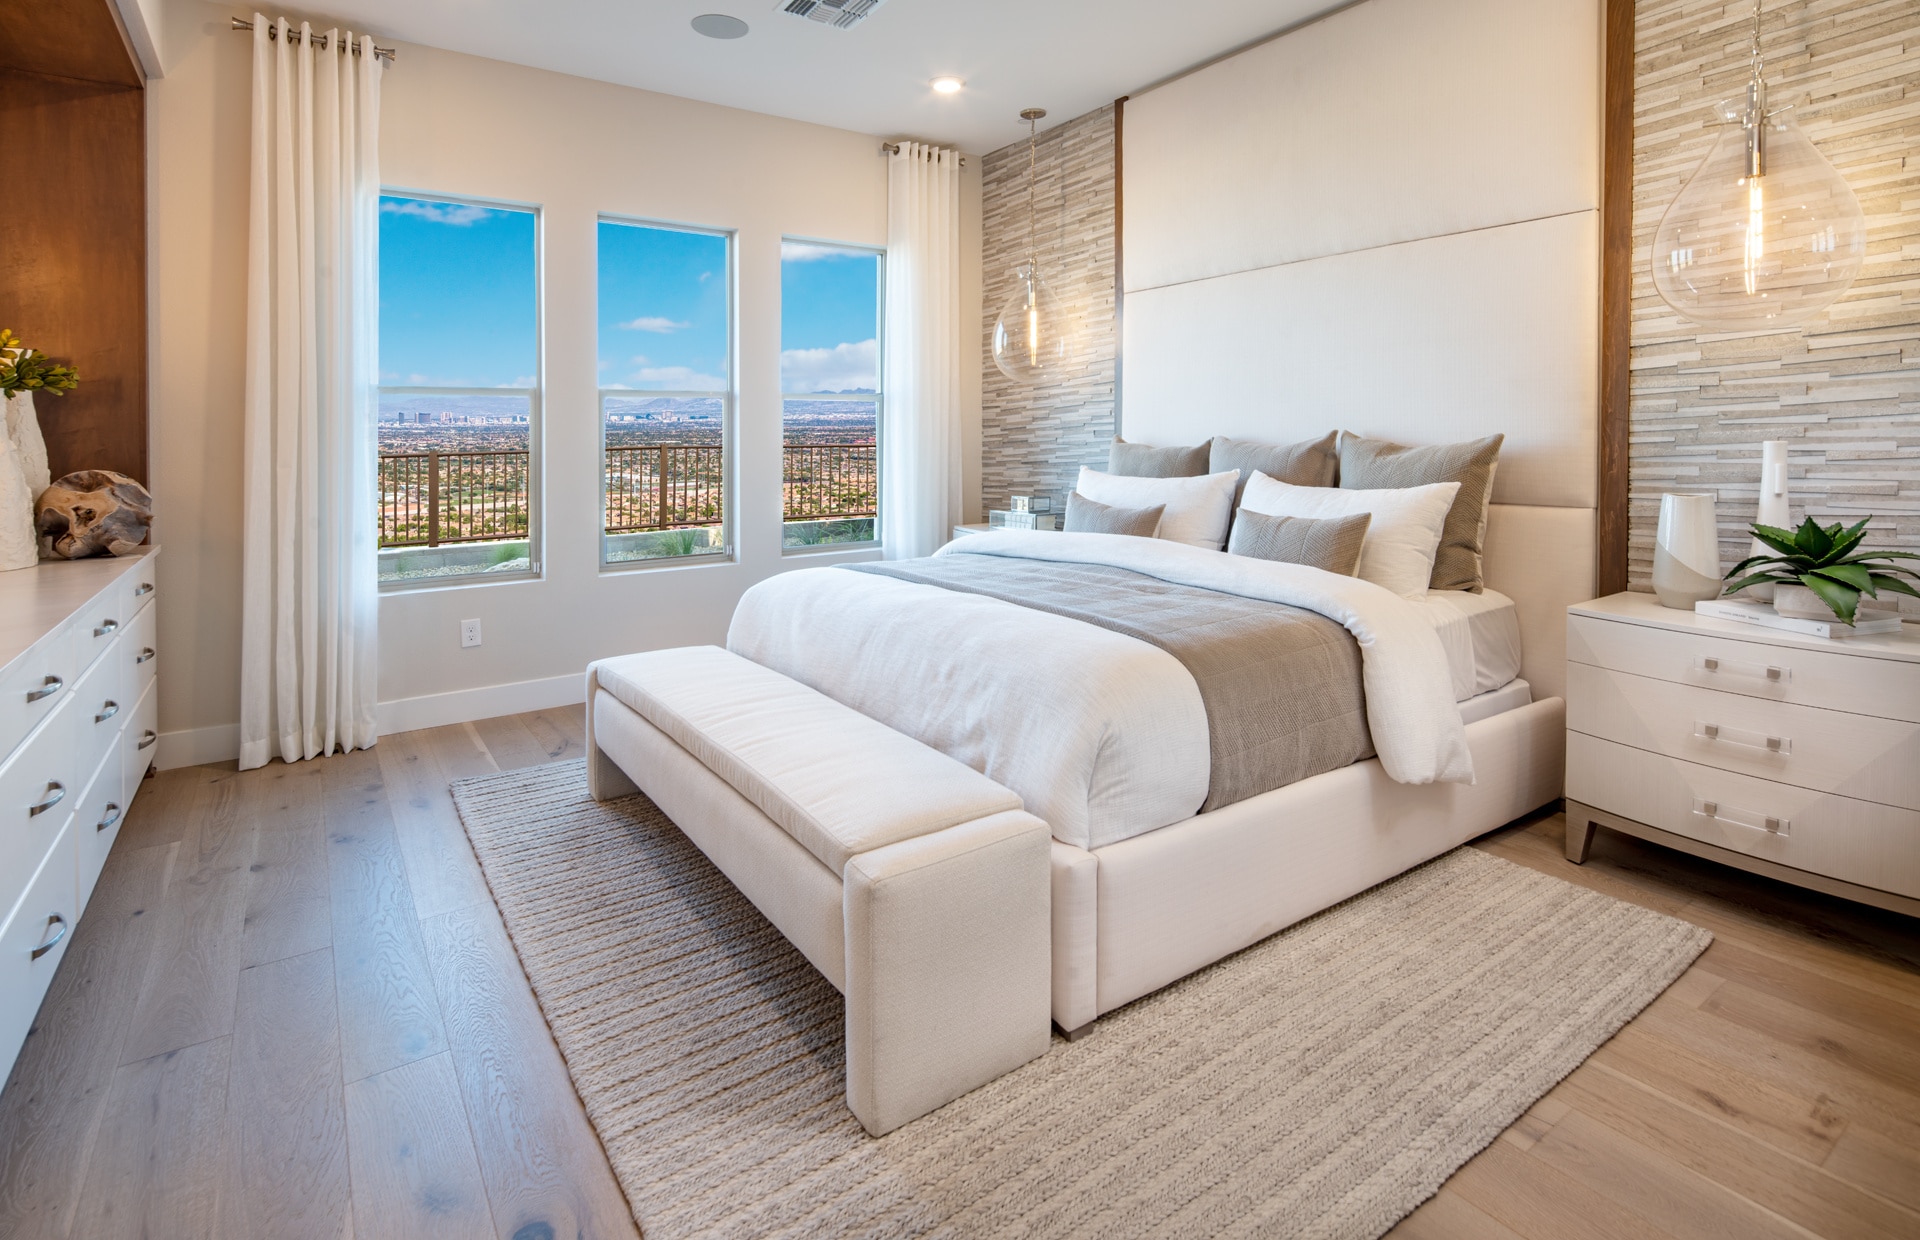 Primary Bedroom of Cesena Model at Carmel Cliff by Pulte Homes